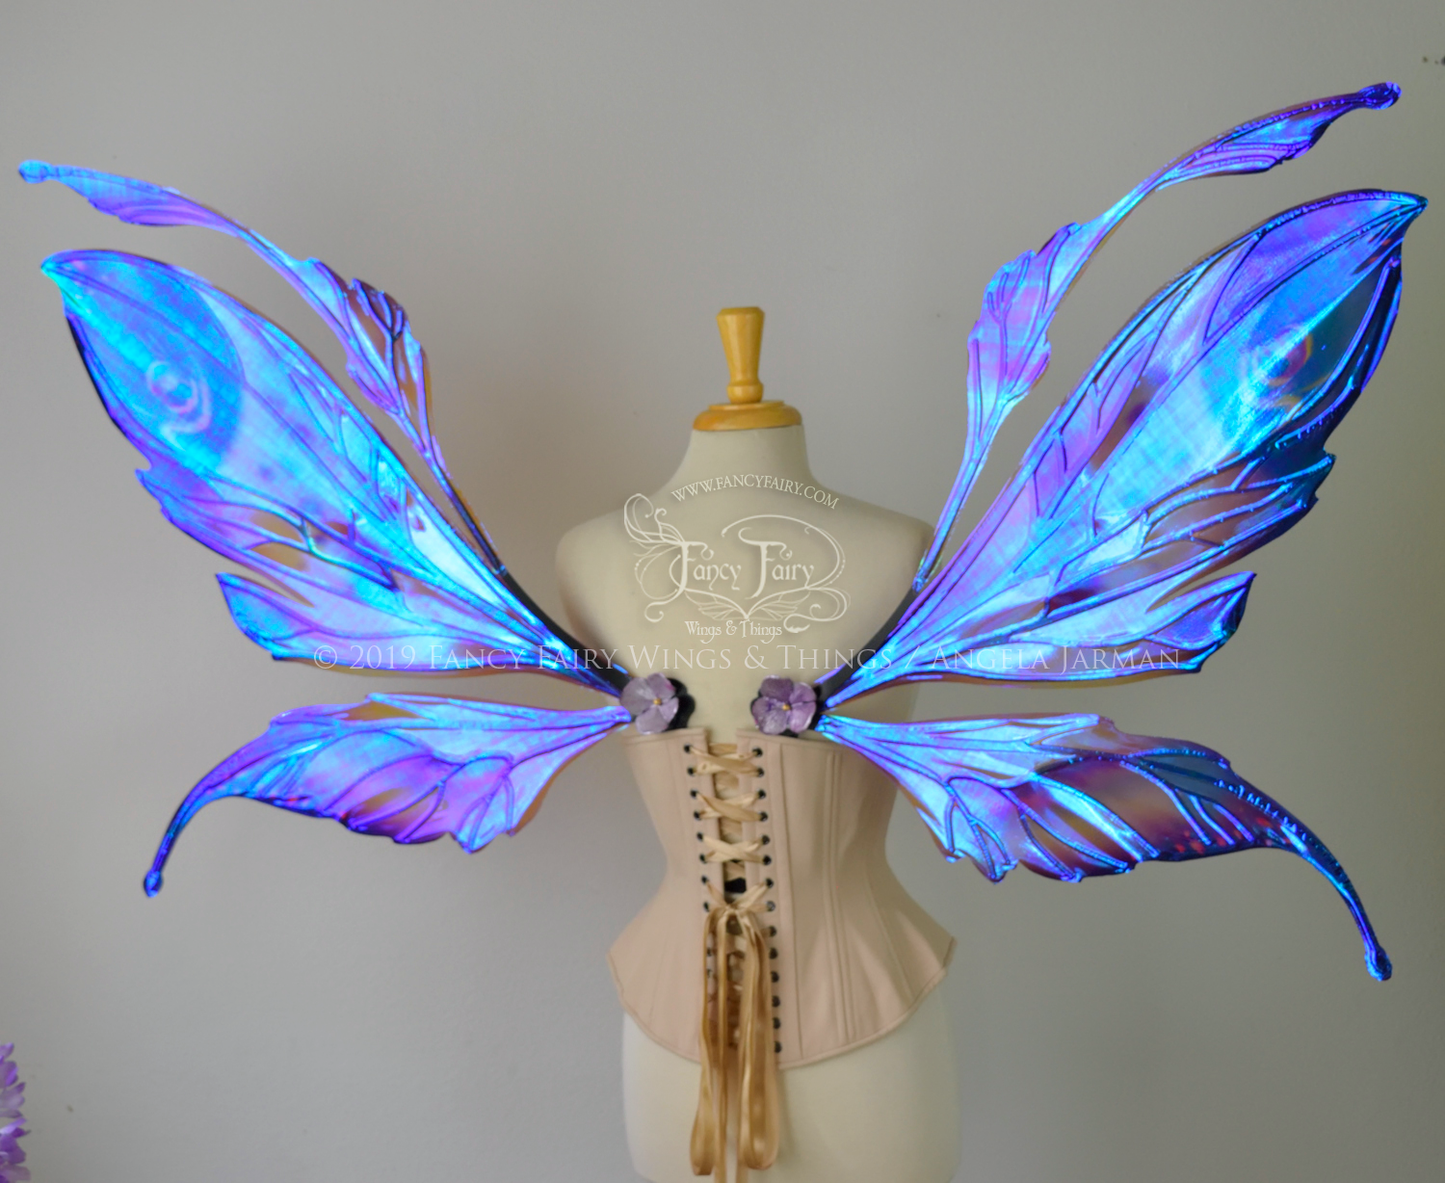 Back view of a dress form wearing an underbust corset & extra large iridescent fairy wings with mauve purple & blue color pattern 